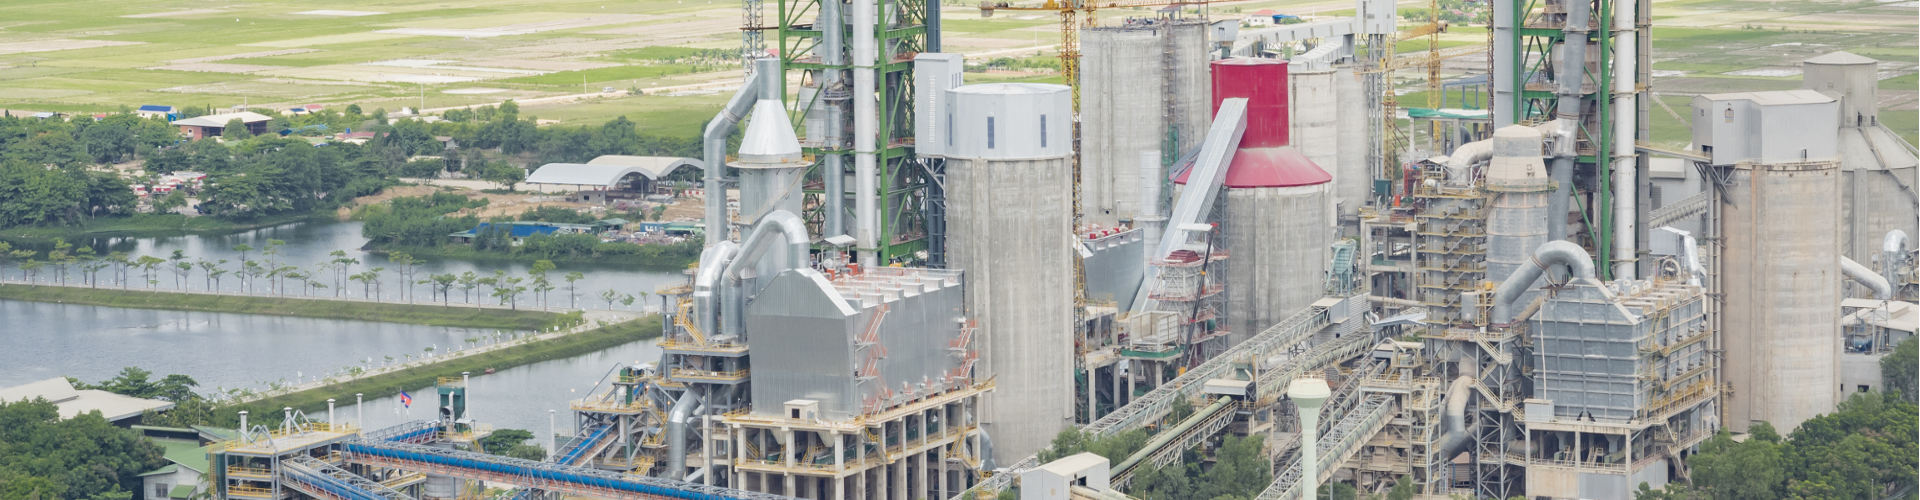 Cement Industry Plant and Equipment Products Supply